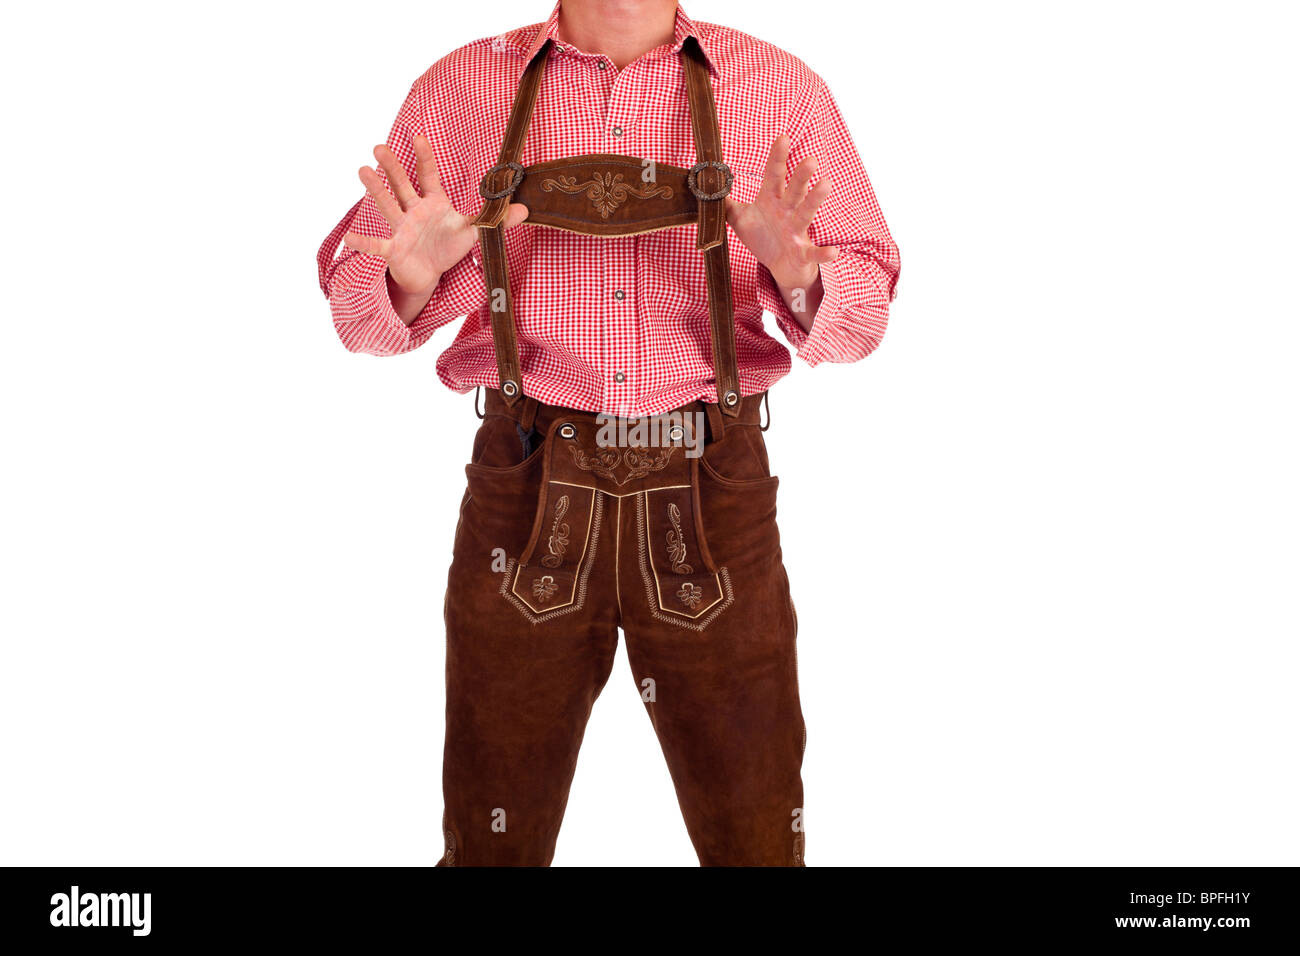 Bavarian man with oktoberfest leather trousers holds his suspenders. Isolated on white background. Stock Photo